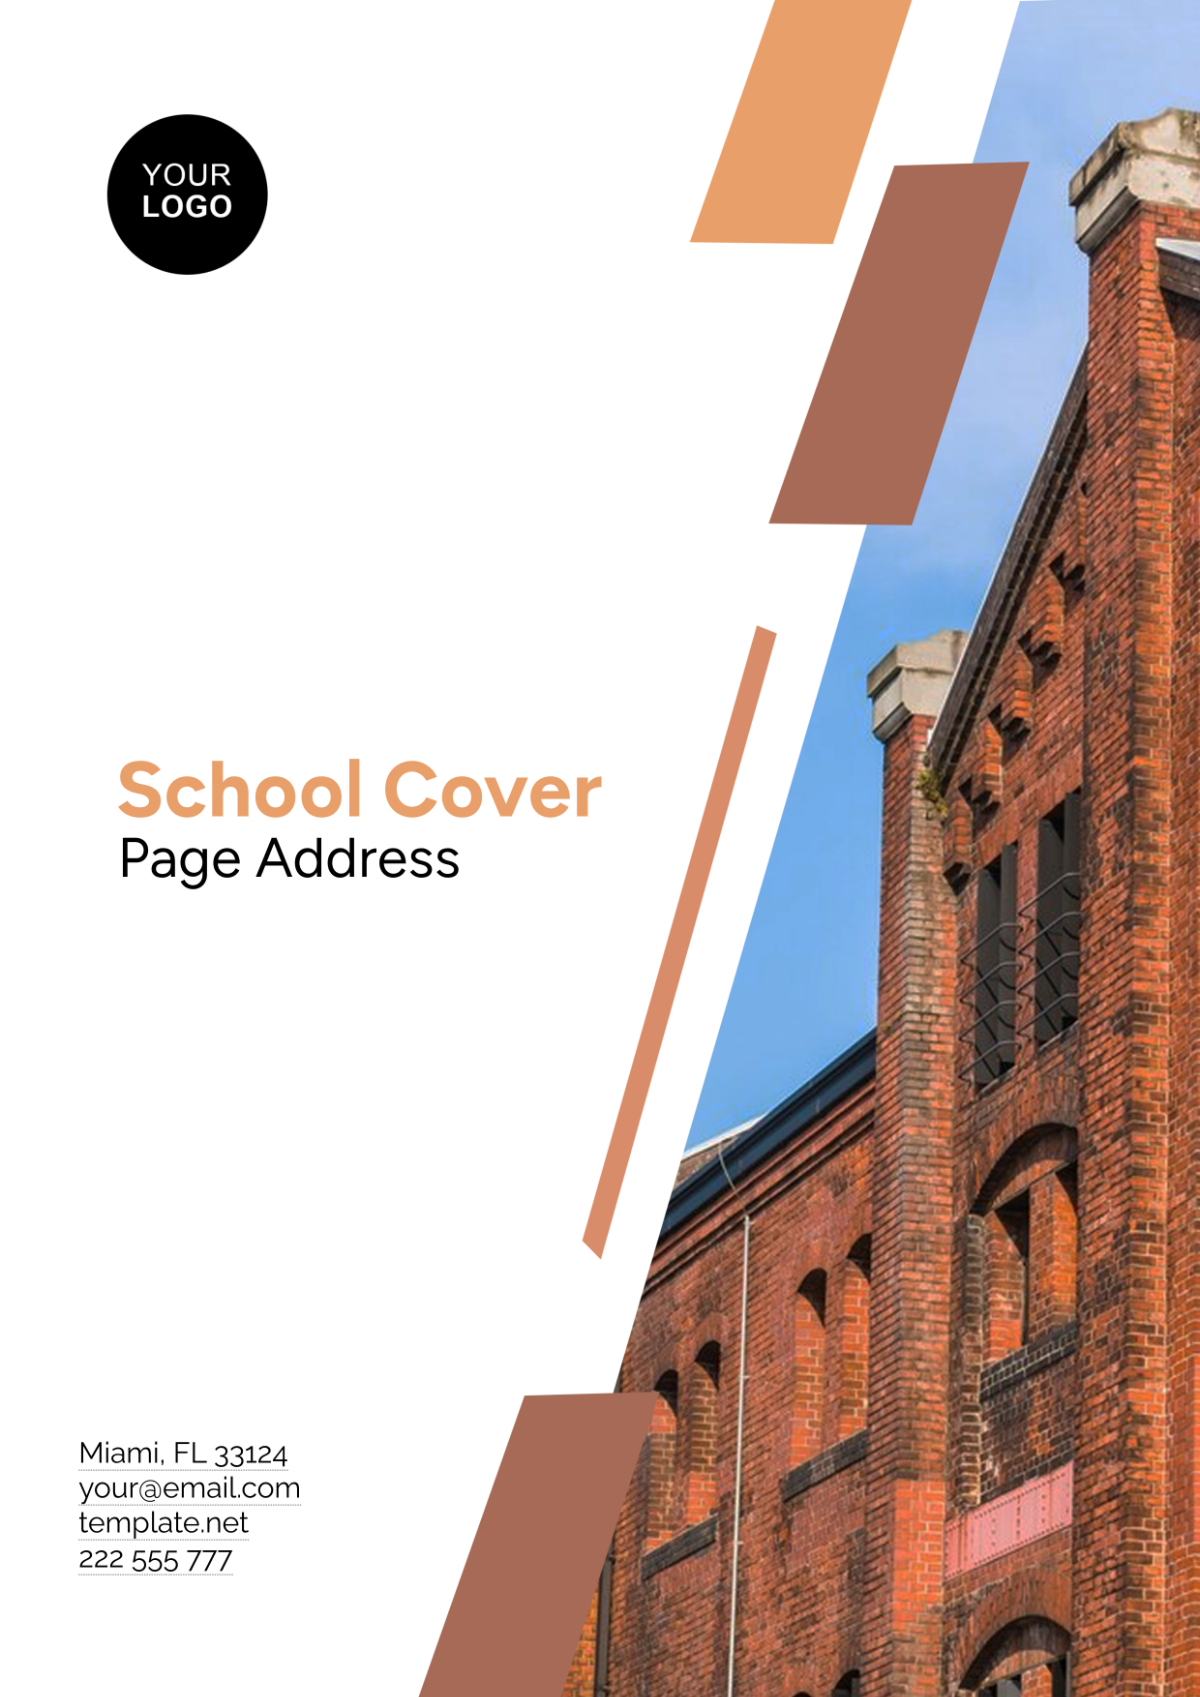 School Cover Page Address